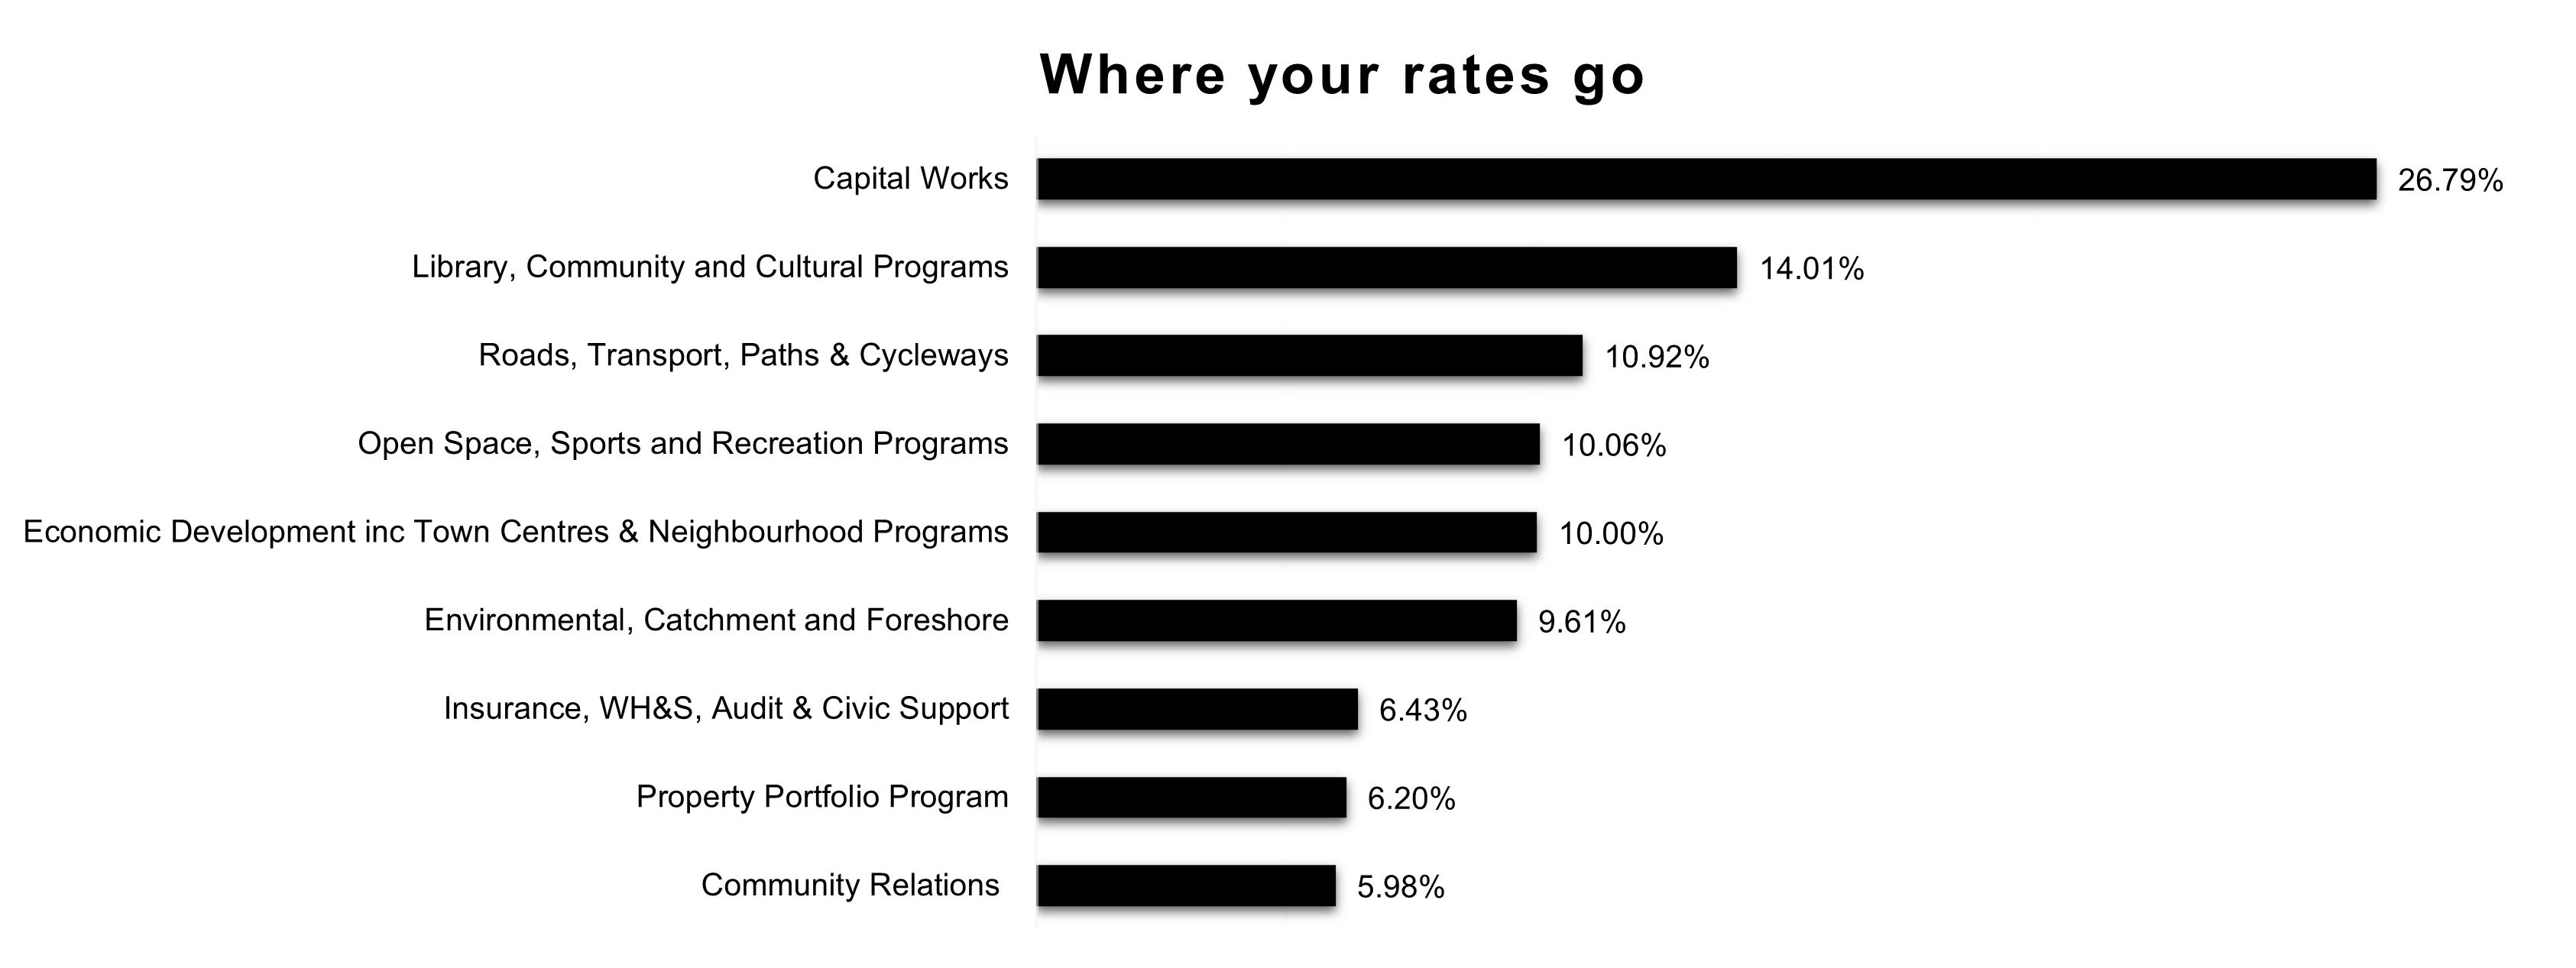 22-Where your rates go.png